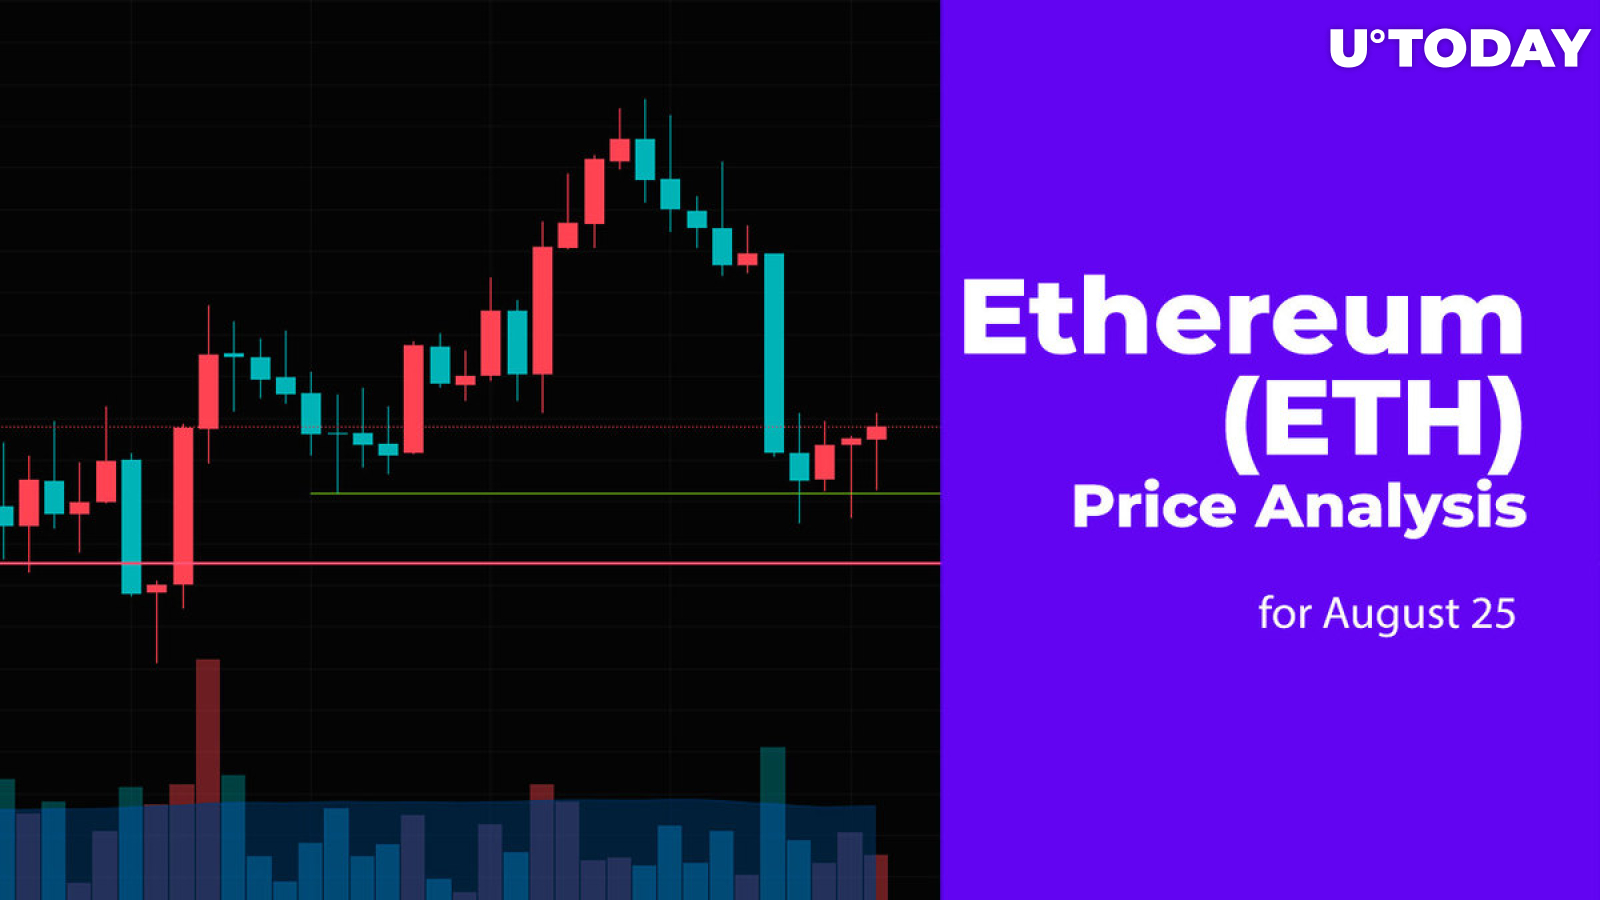 Ethereum (ETH) Price Analysis for August 25